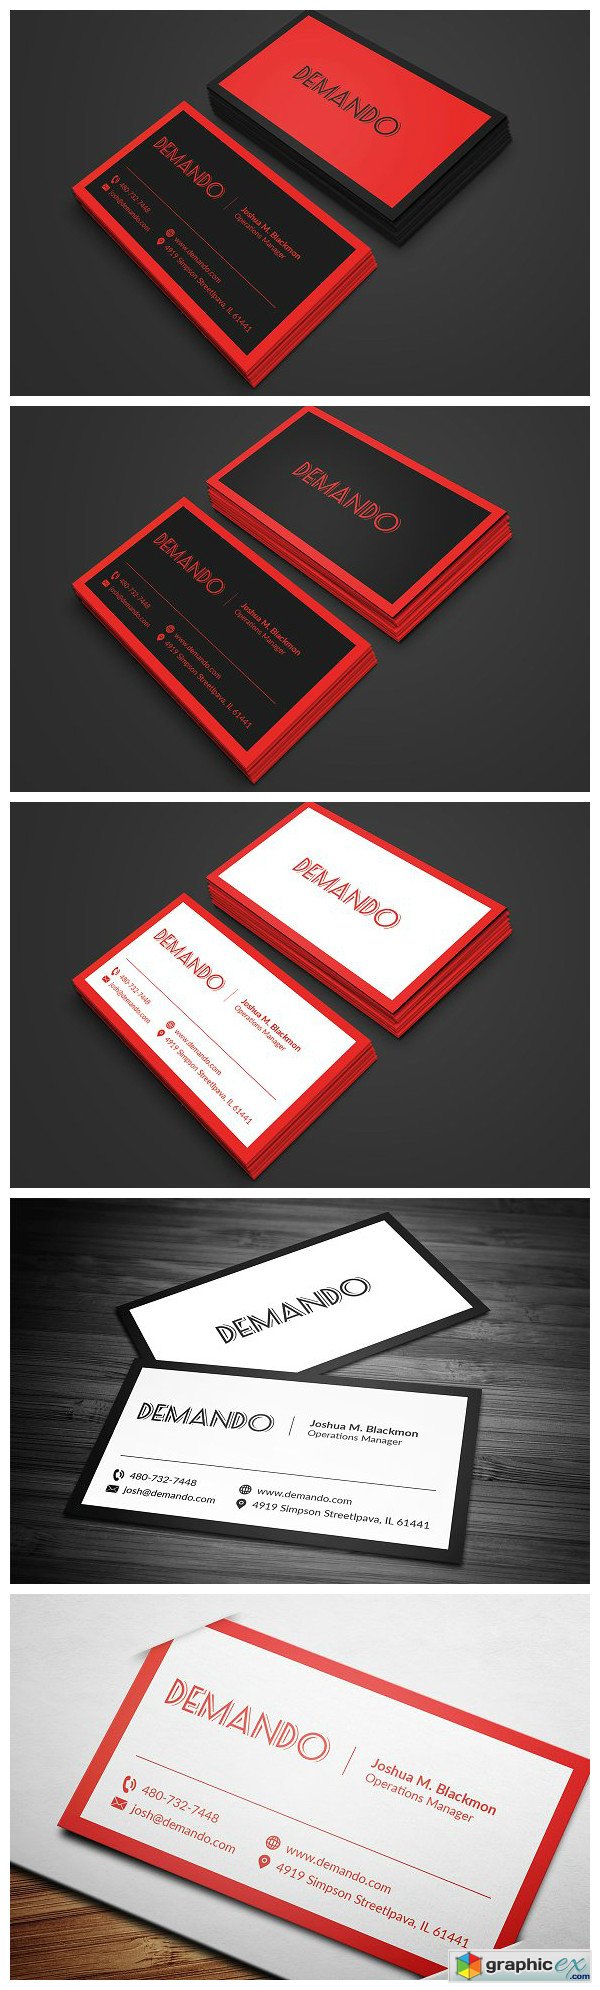 Black and Red Business Card